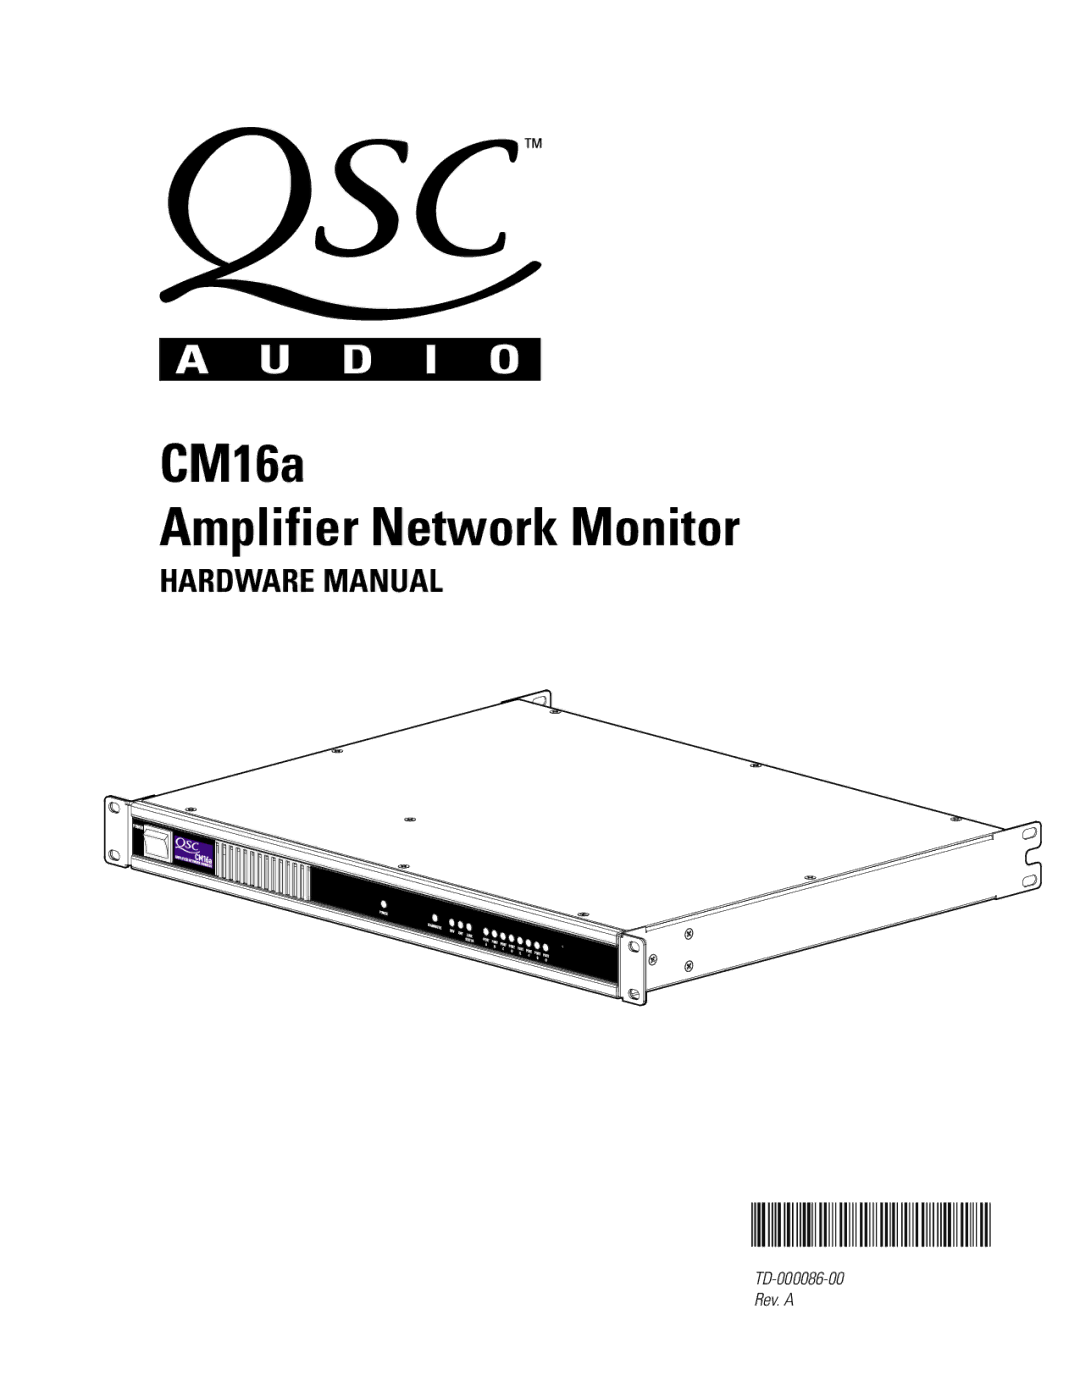 QSC Audio manual CM16a Amplifier Network Monitor 